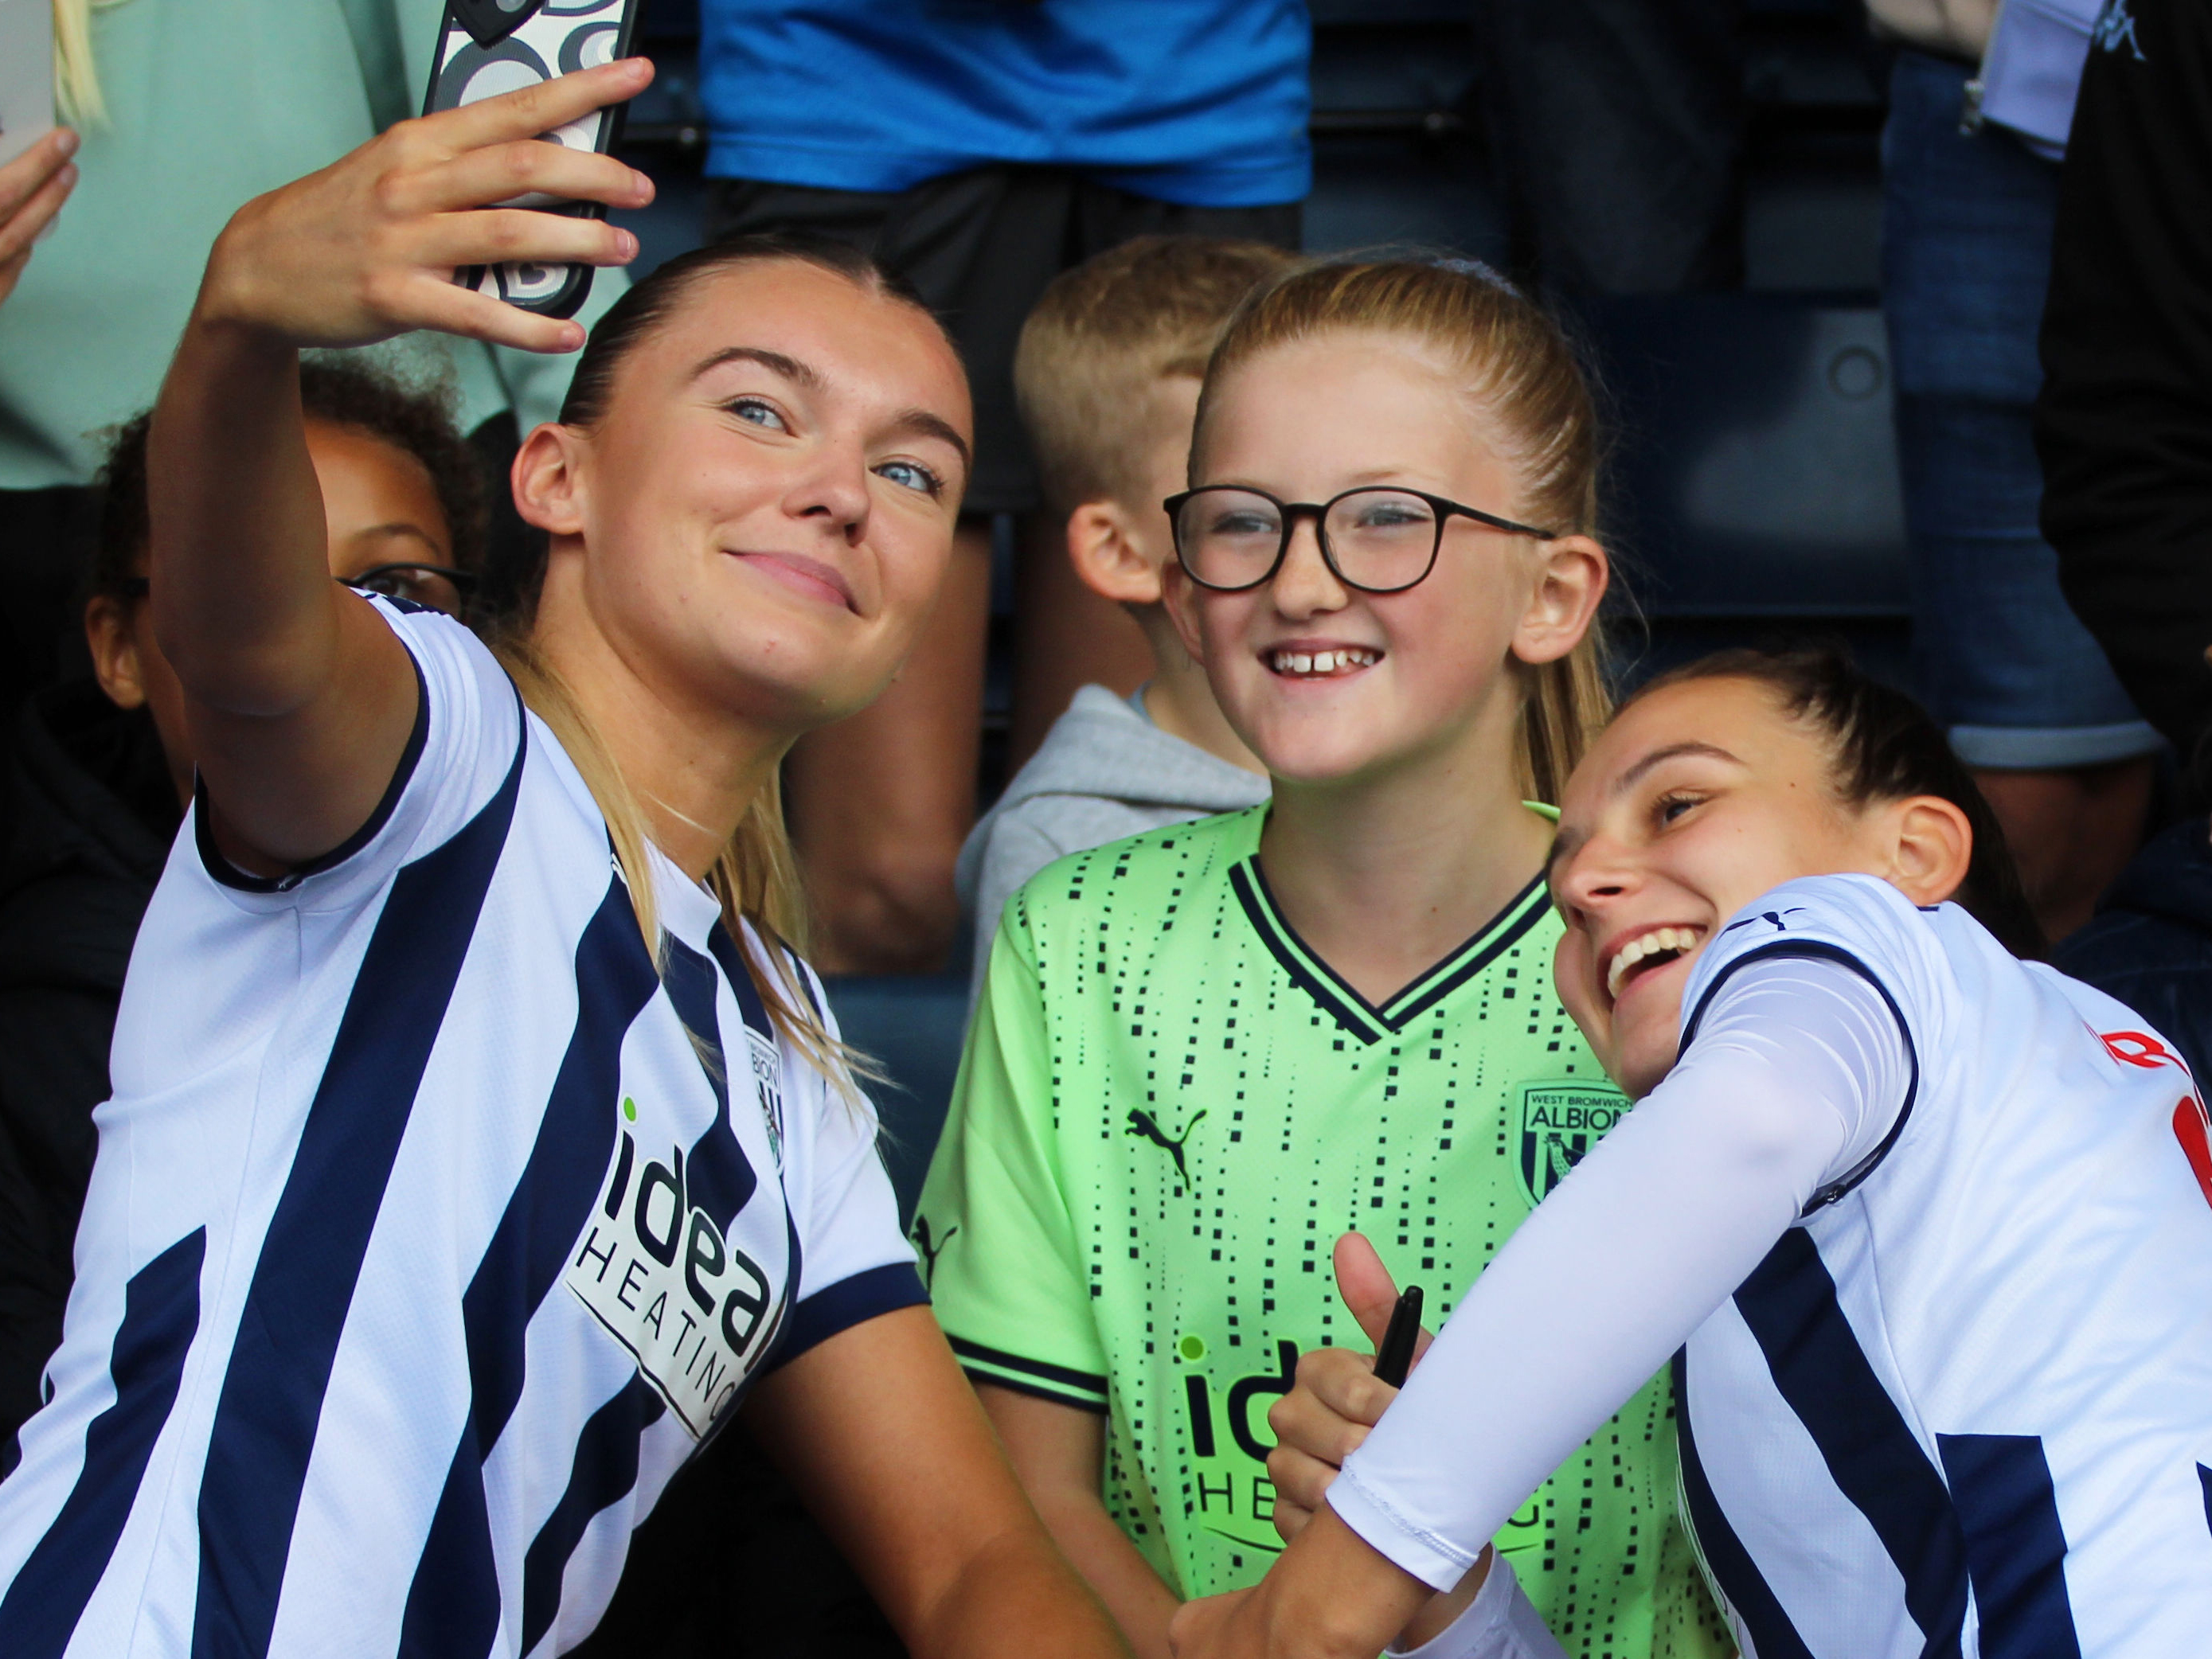 Taylor Reynolds and Izzy Green have a selfie with a young supporter